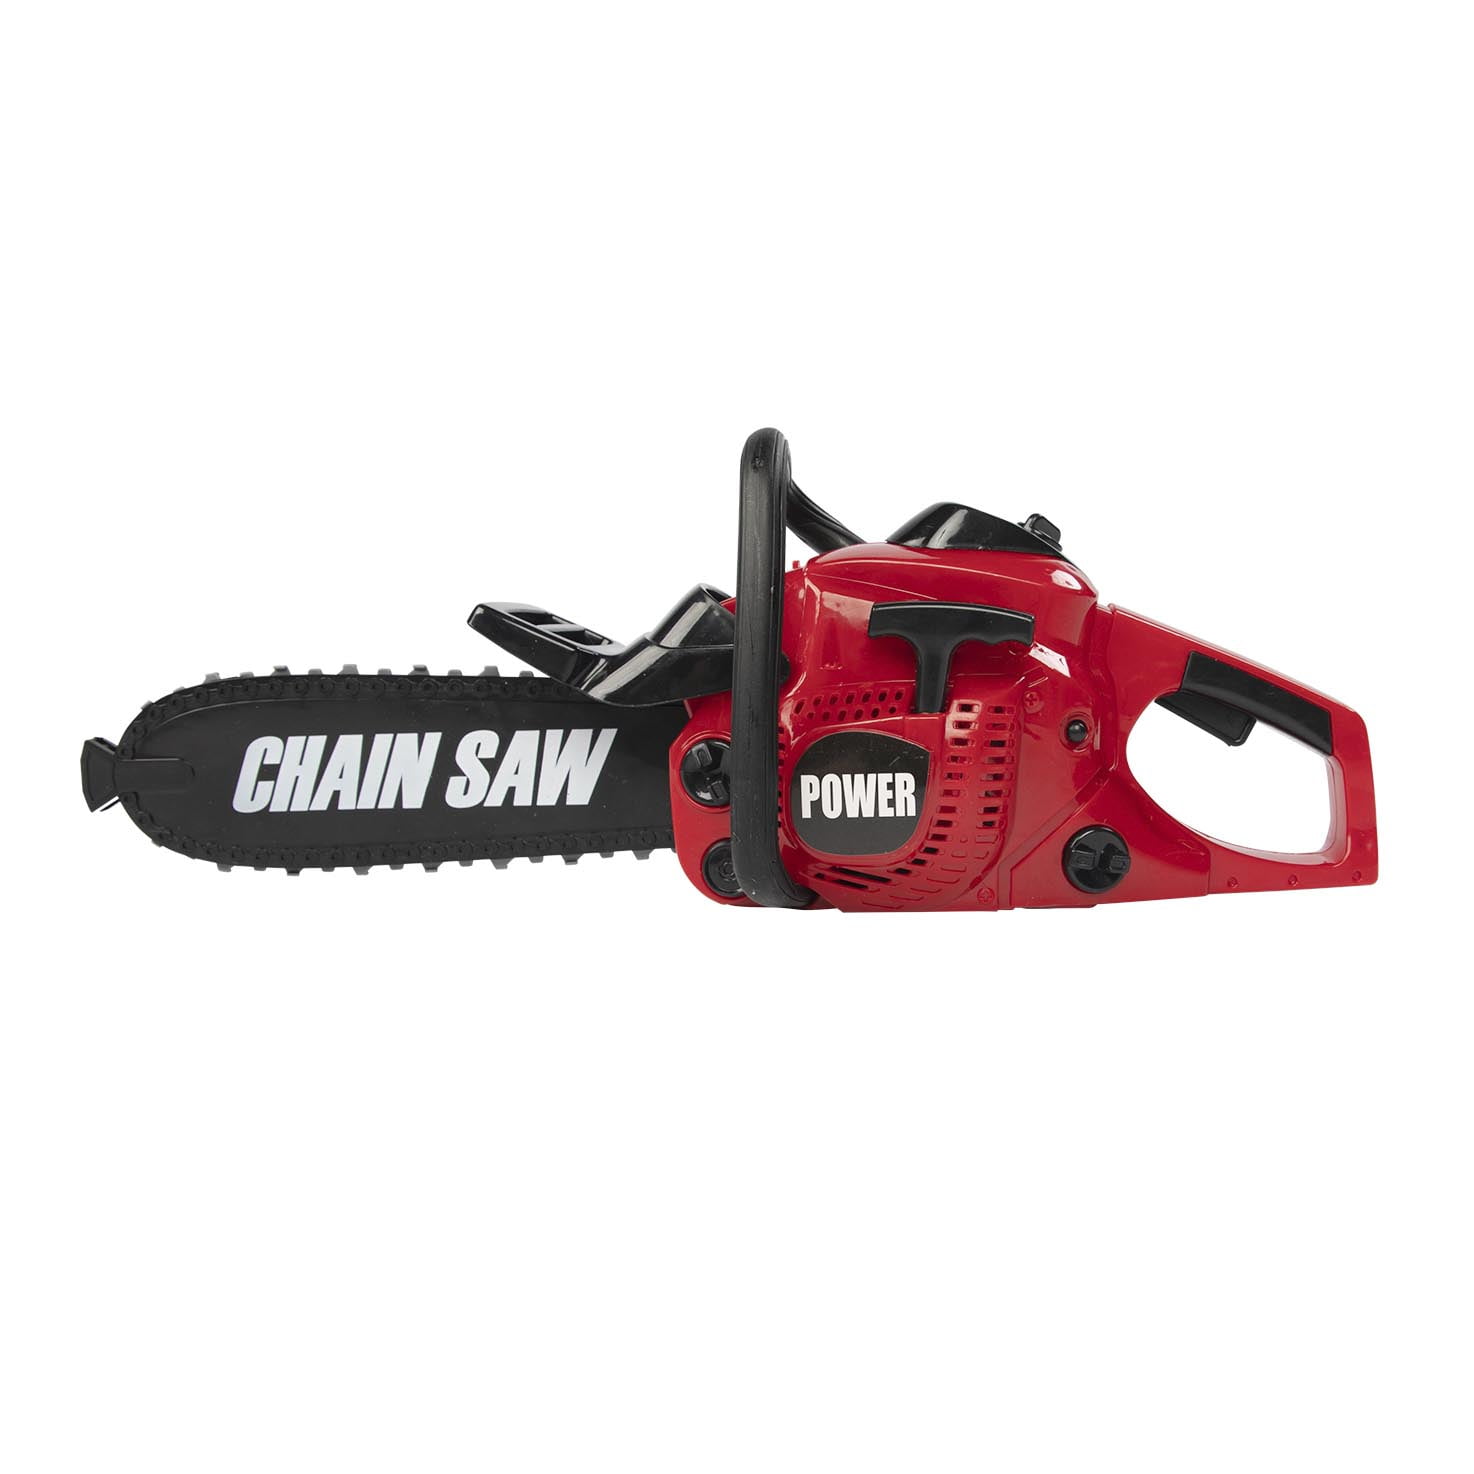 Kids Toy Chainsaw Pretend Play Boy Gift Toddler Tool Indoor Outdoor Gift New 